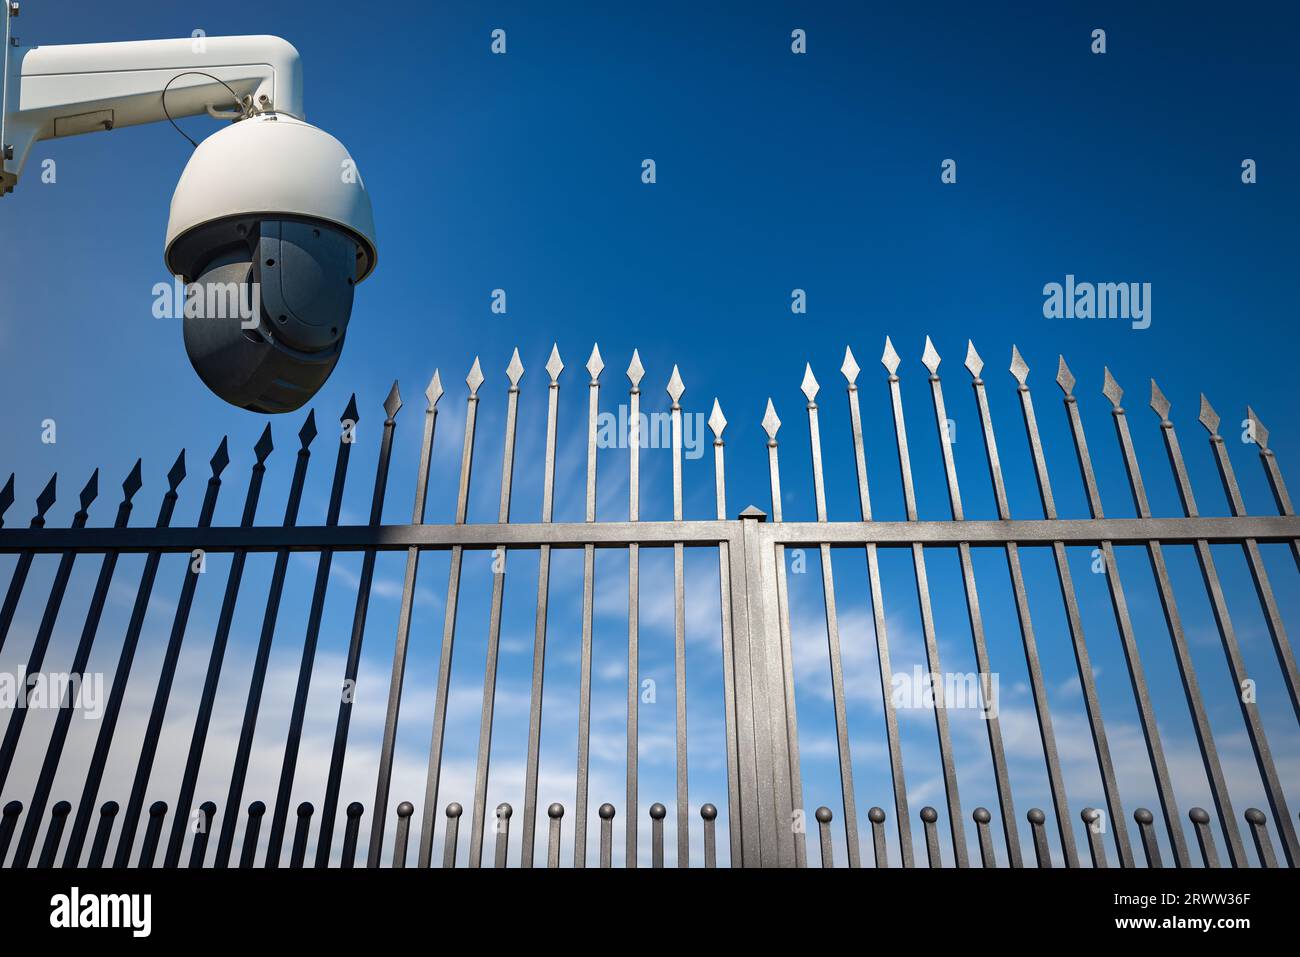 Modern security camera monitoring the entrance to a gate of a private property. Wrought iron gate with sharp points on blue sky and copy space. Stock Photo